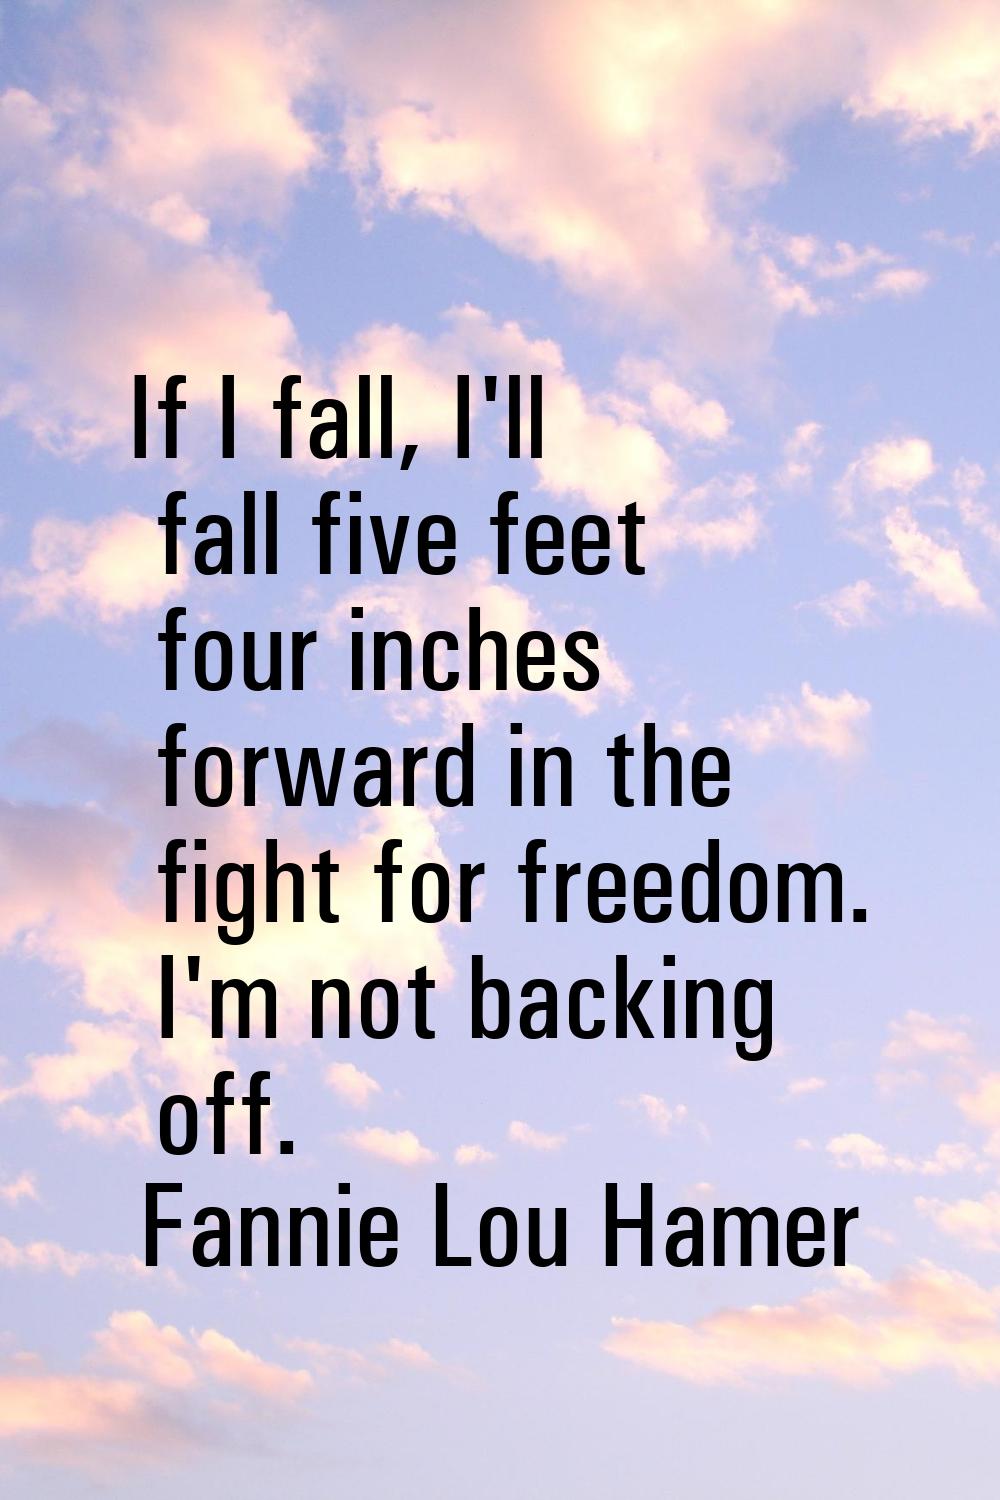 If I fall, I'll fall five feet four inches forward in the fight for freedom. I'm not backing off.